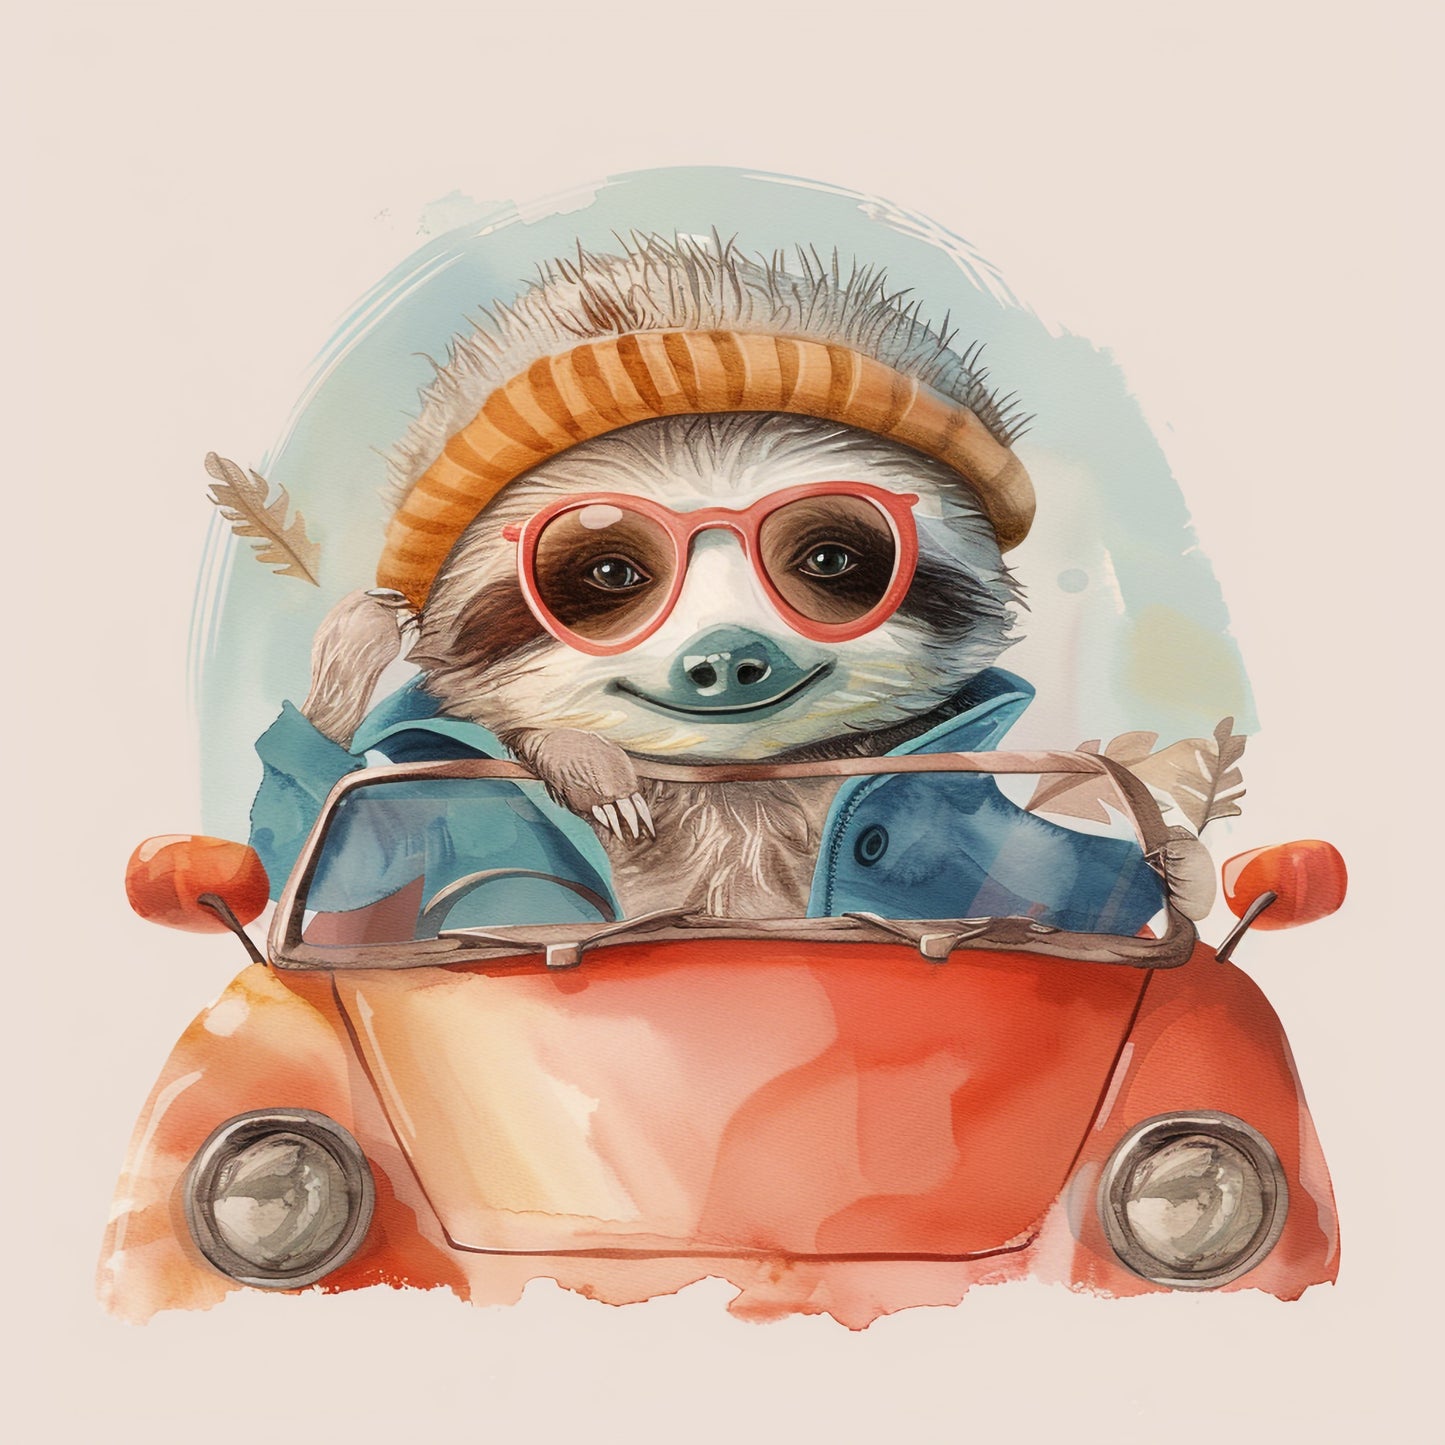 Cute Baby Sloth in Retro Car on Whimsical Adventure